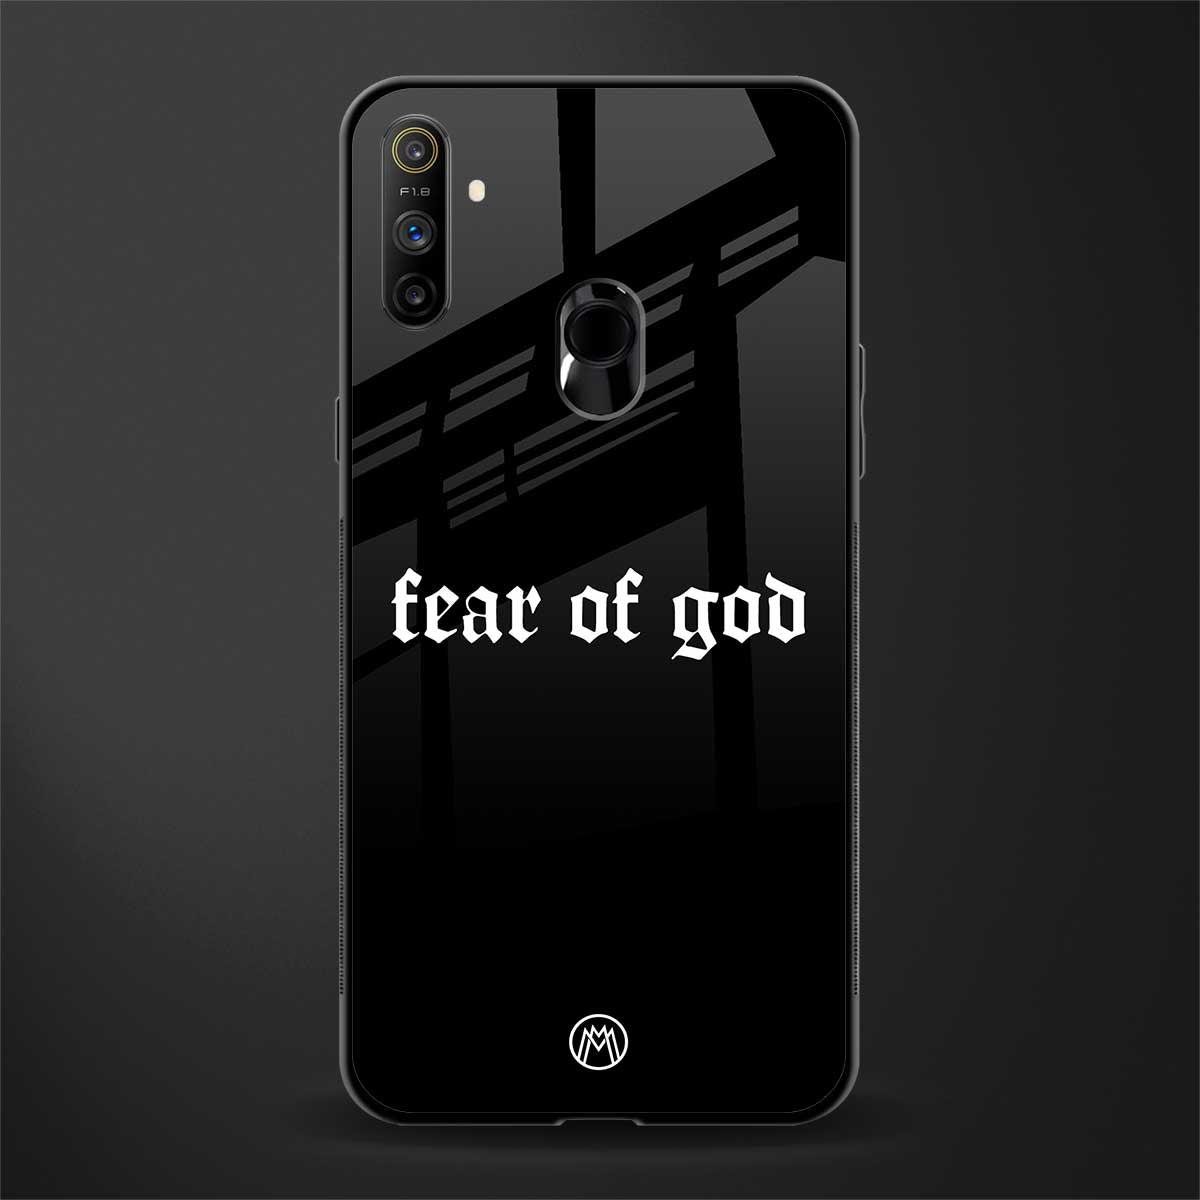 fear of god phone cover for realme narzo 10a